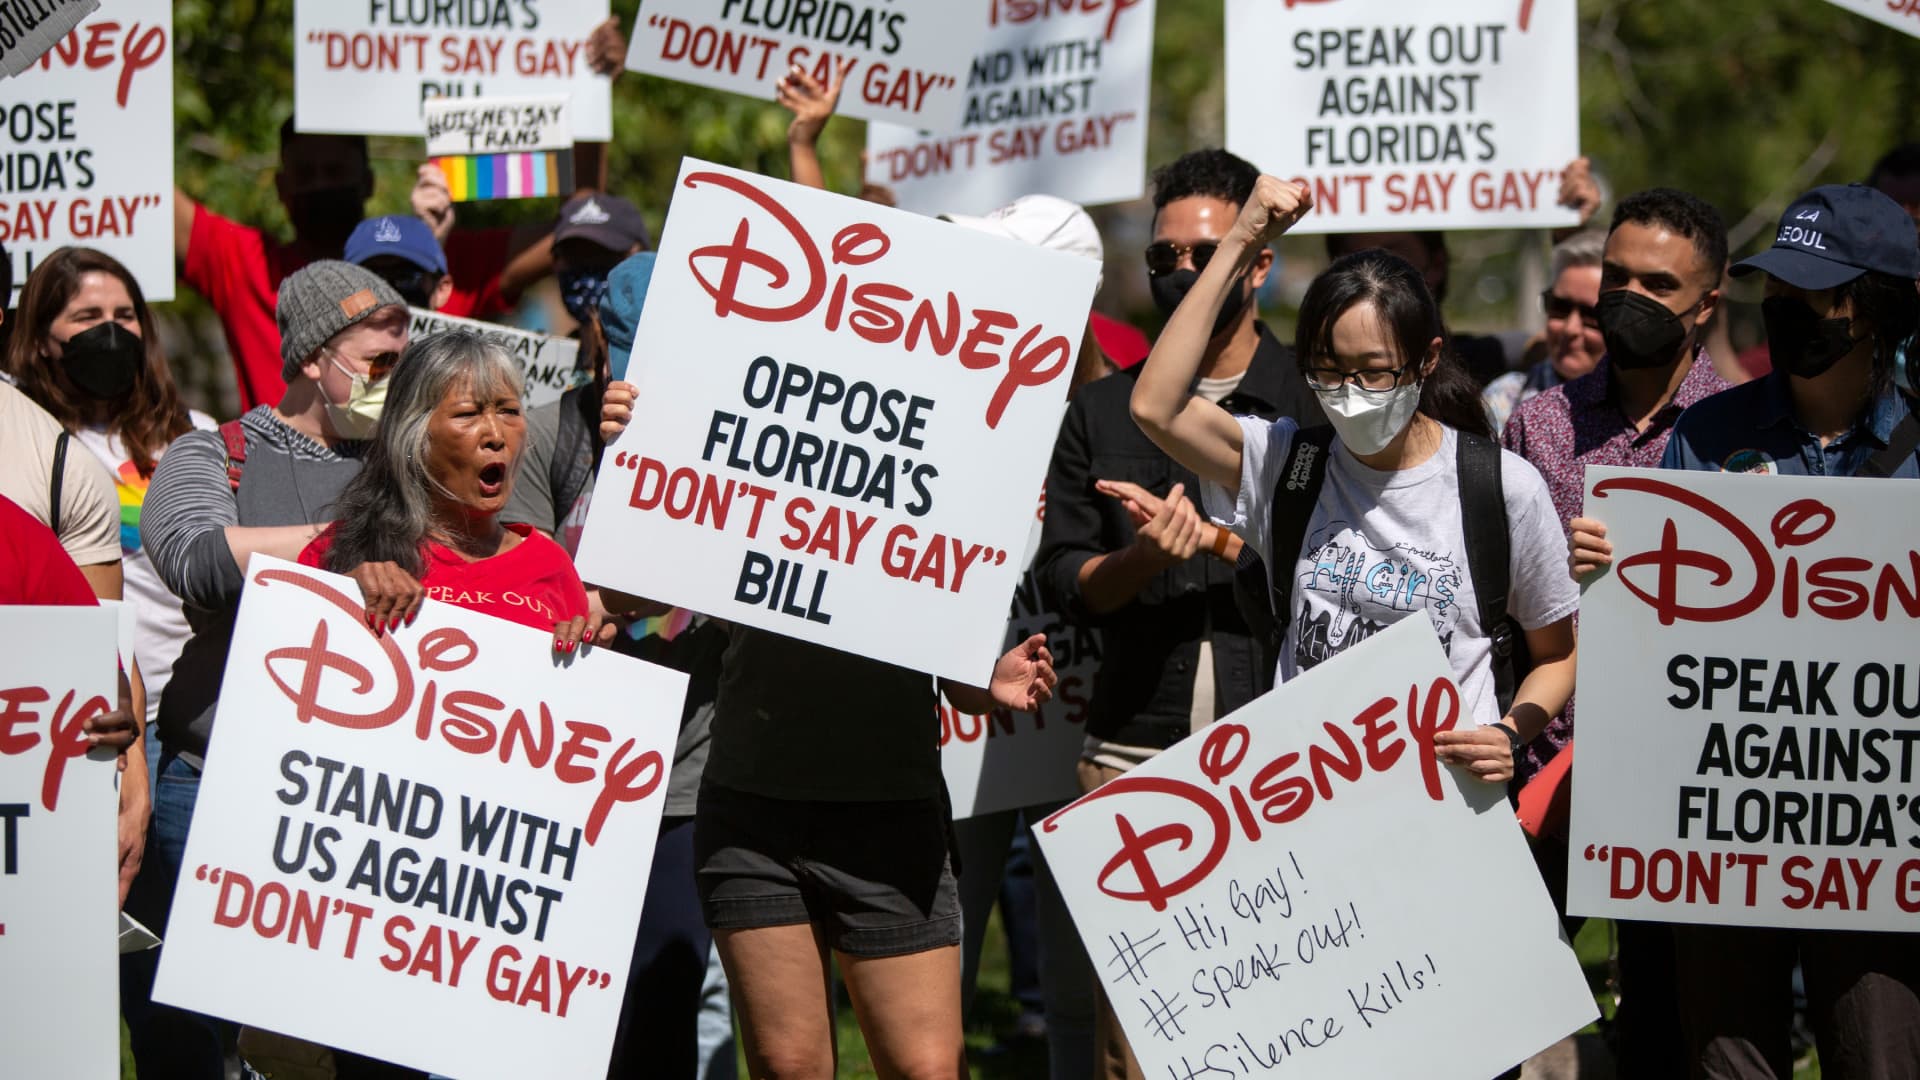 Disney vows to help repeal ‘Don’t Say Gay’ law